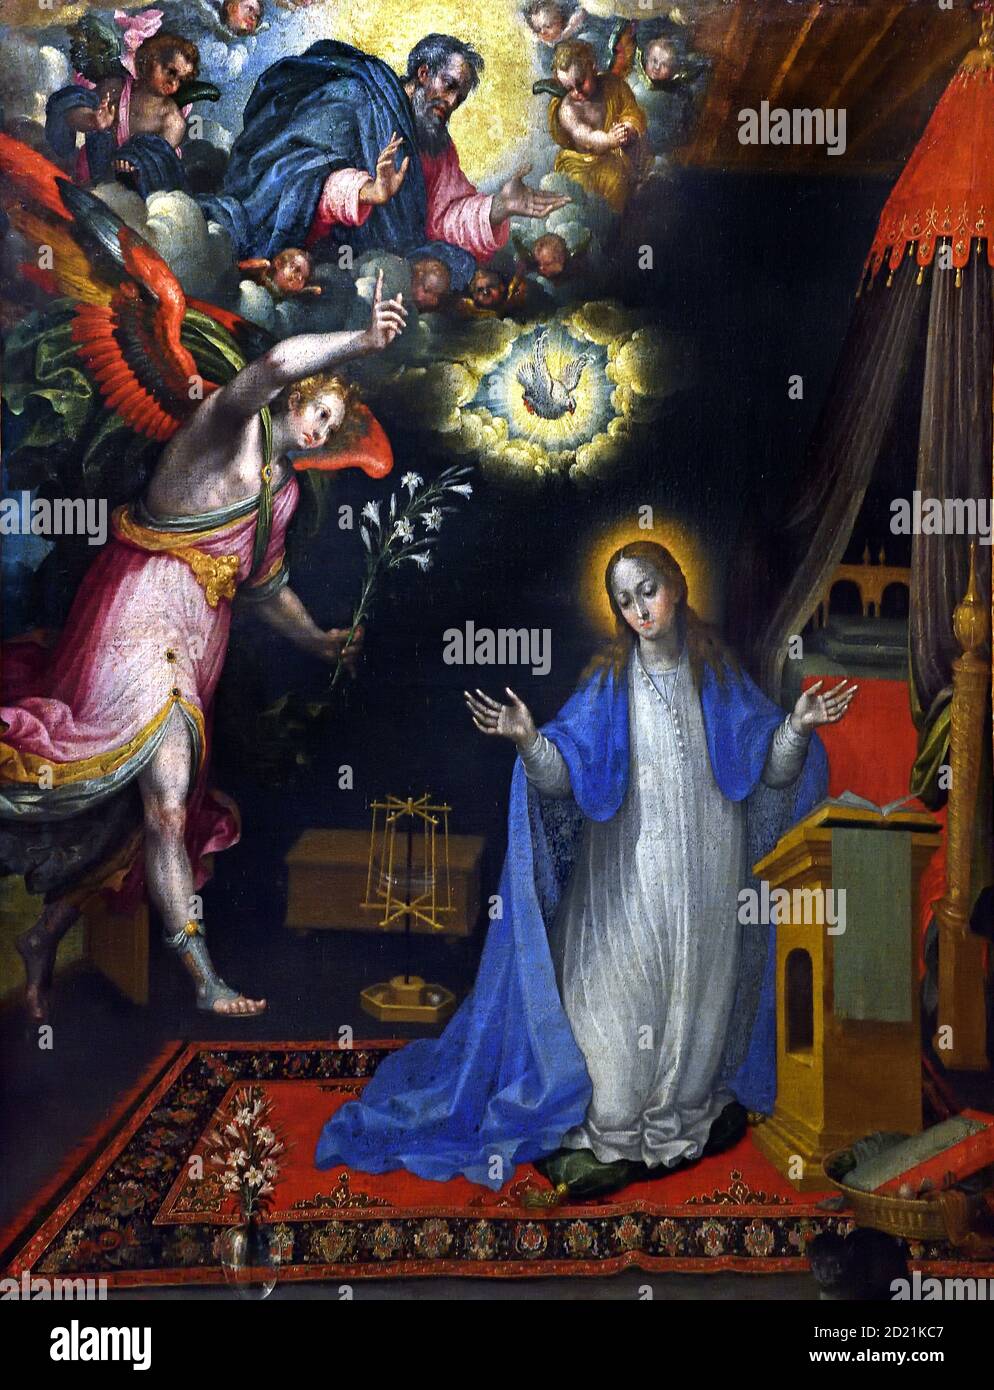 The Annunciation 1609-1643 López de Herrera, Alonso  Mary, kneeling in the middle of a room, Receive the news that she is going to give birth to a child whom she will name Jesus. The bearer of the good news is the archangel Saint Gabriel. Spain, Spanish, Stock Photo